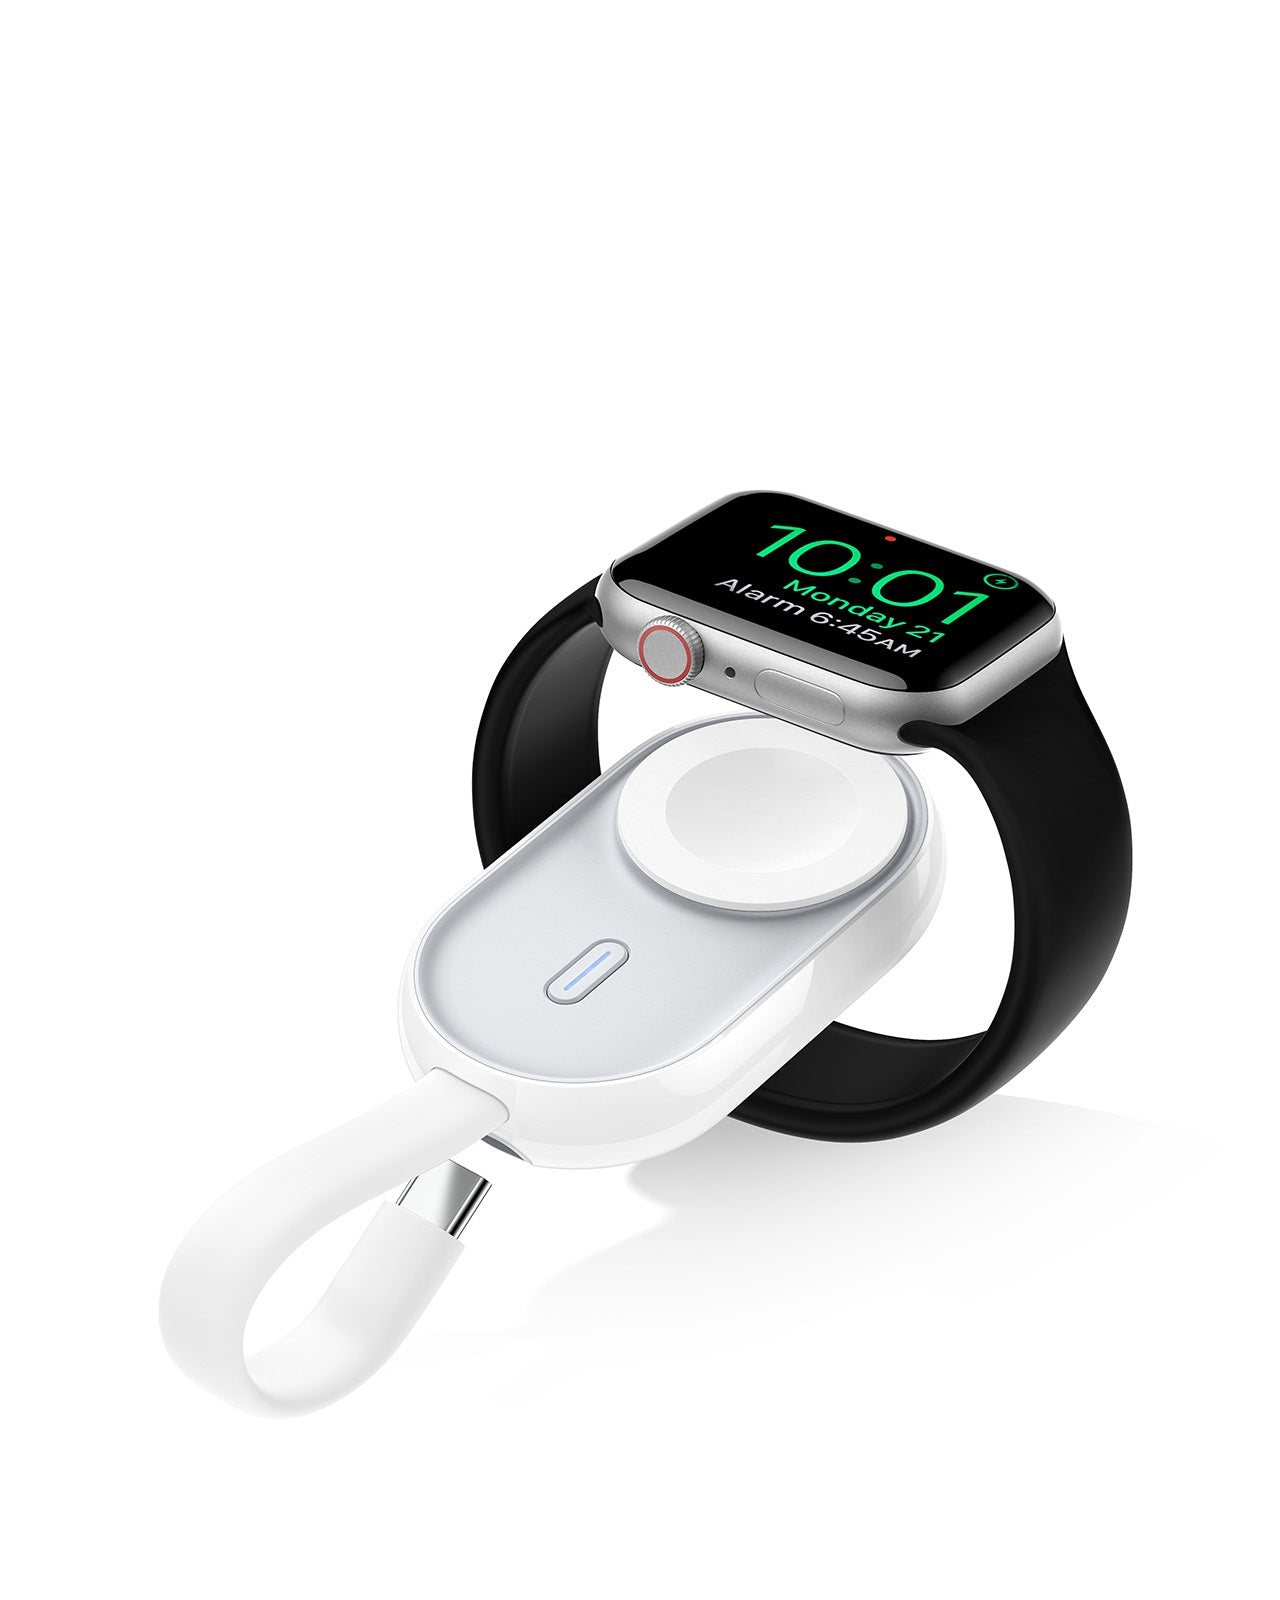 W0102 Super Mini Wireless Charger for Apple Watch, 1200mAh Watch Battery Pack with Input Cable